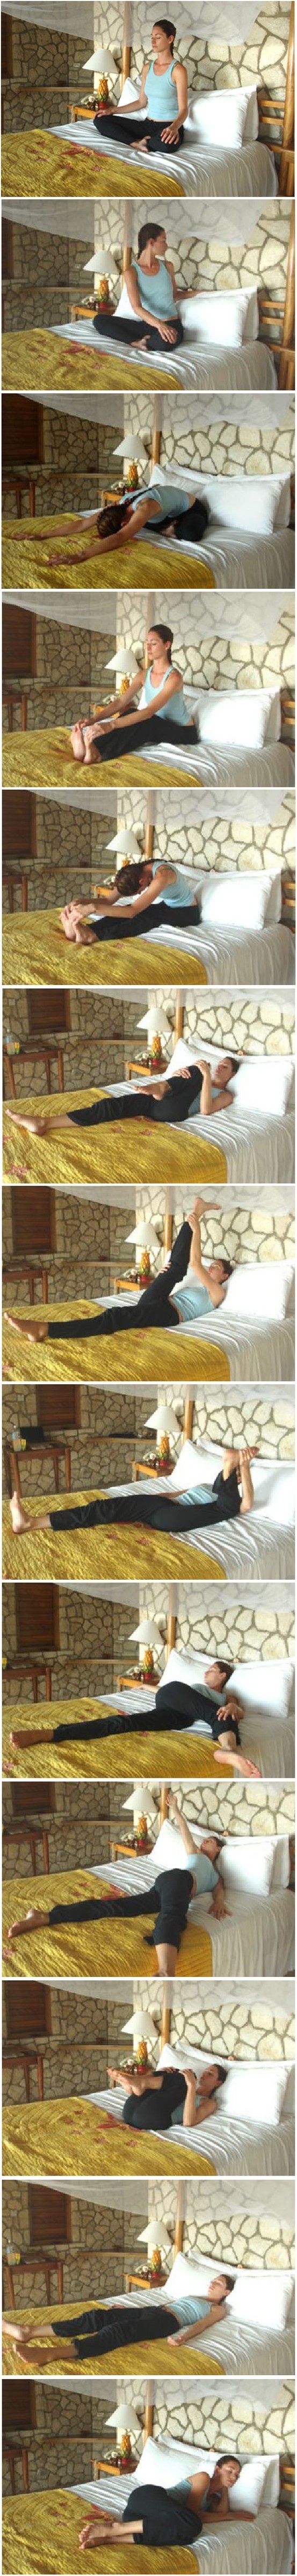 Bed time (or anytime) yoga stretches. Releases tension in lower back, elongating...